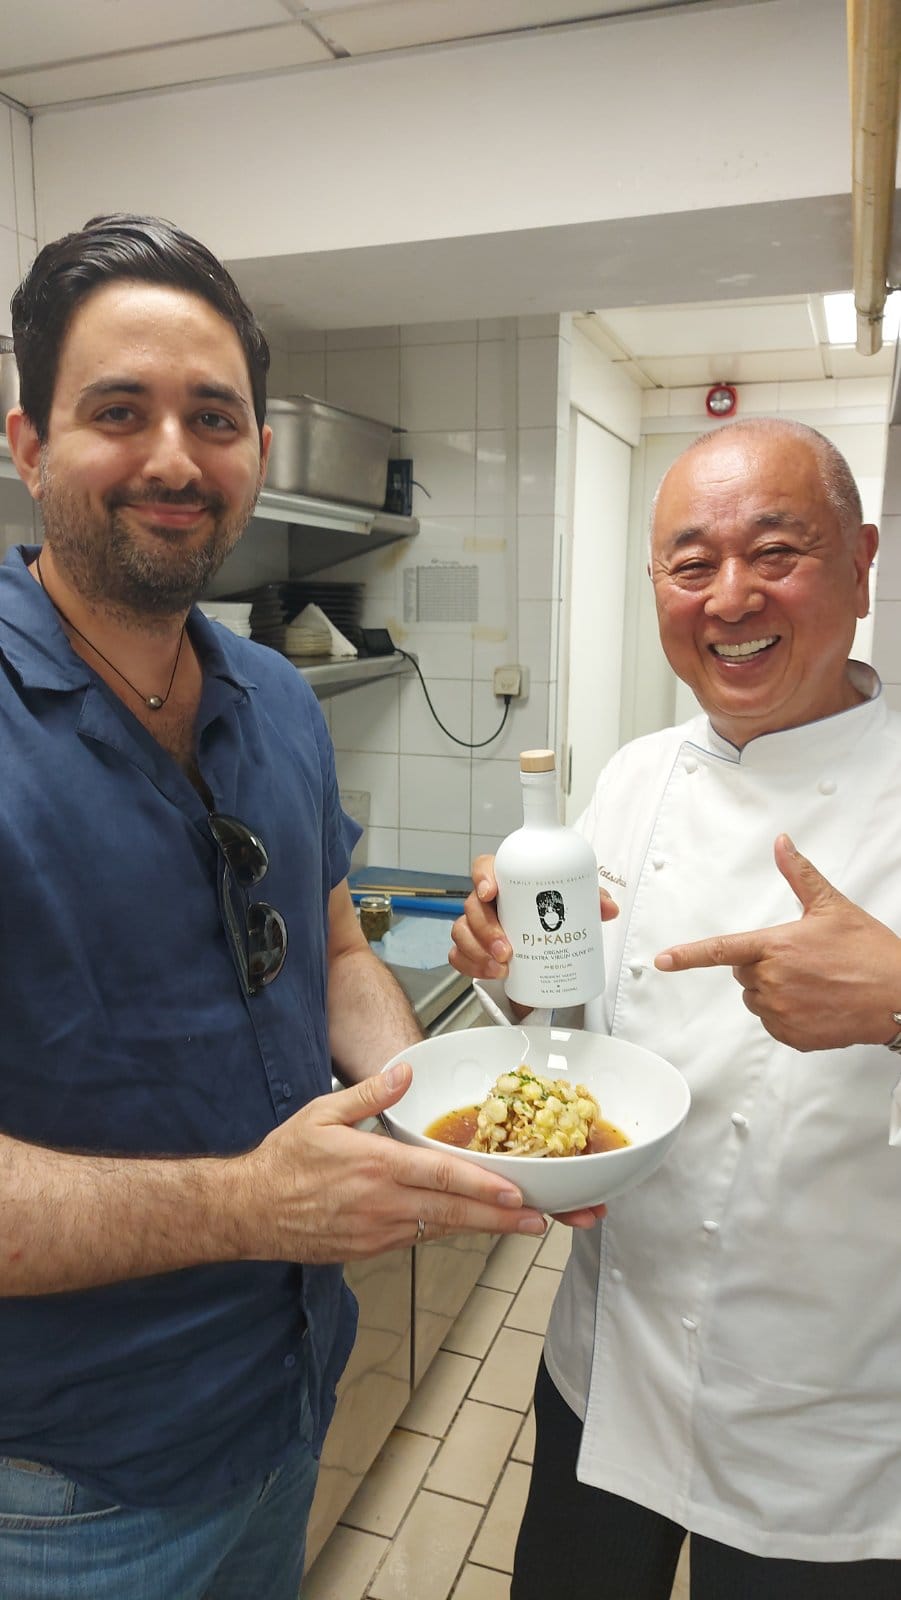 Chef Nobu Matsuhisa, pointing to a bottle of PJ KABOS extra virgin olive oil. He uses it in his Nobu and Matsuhisa restaurants and hotels around the world. 